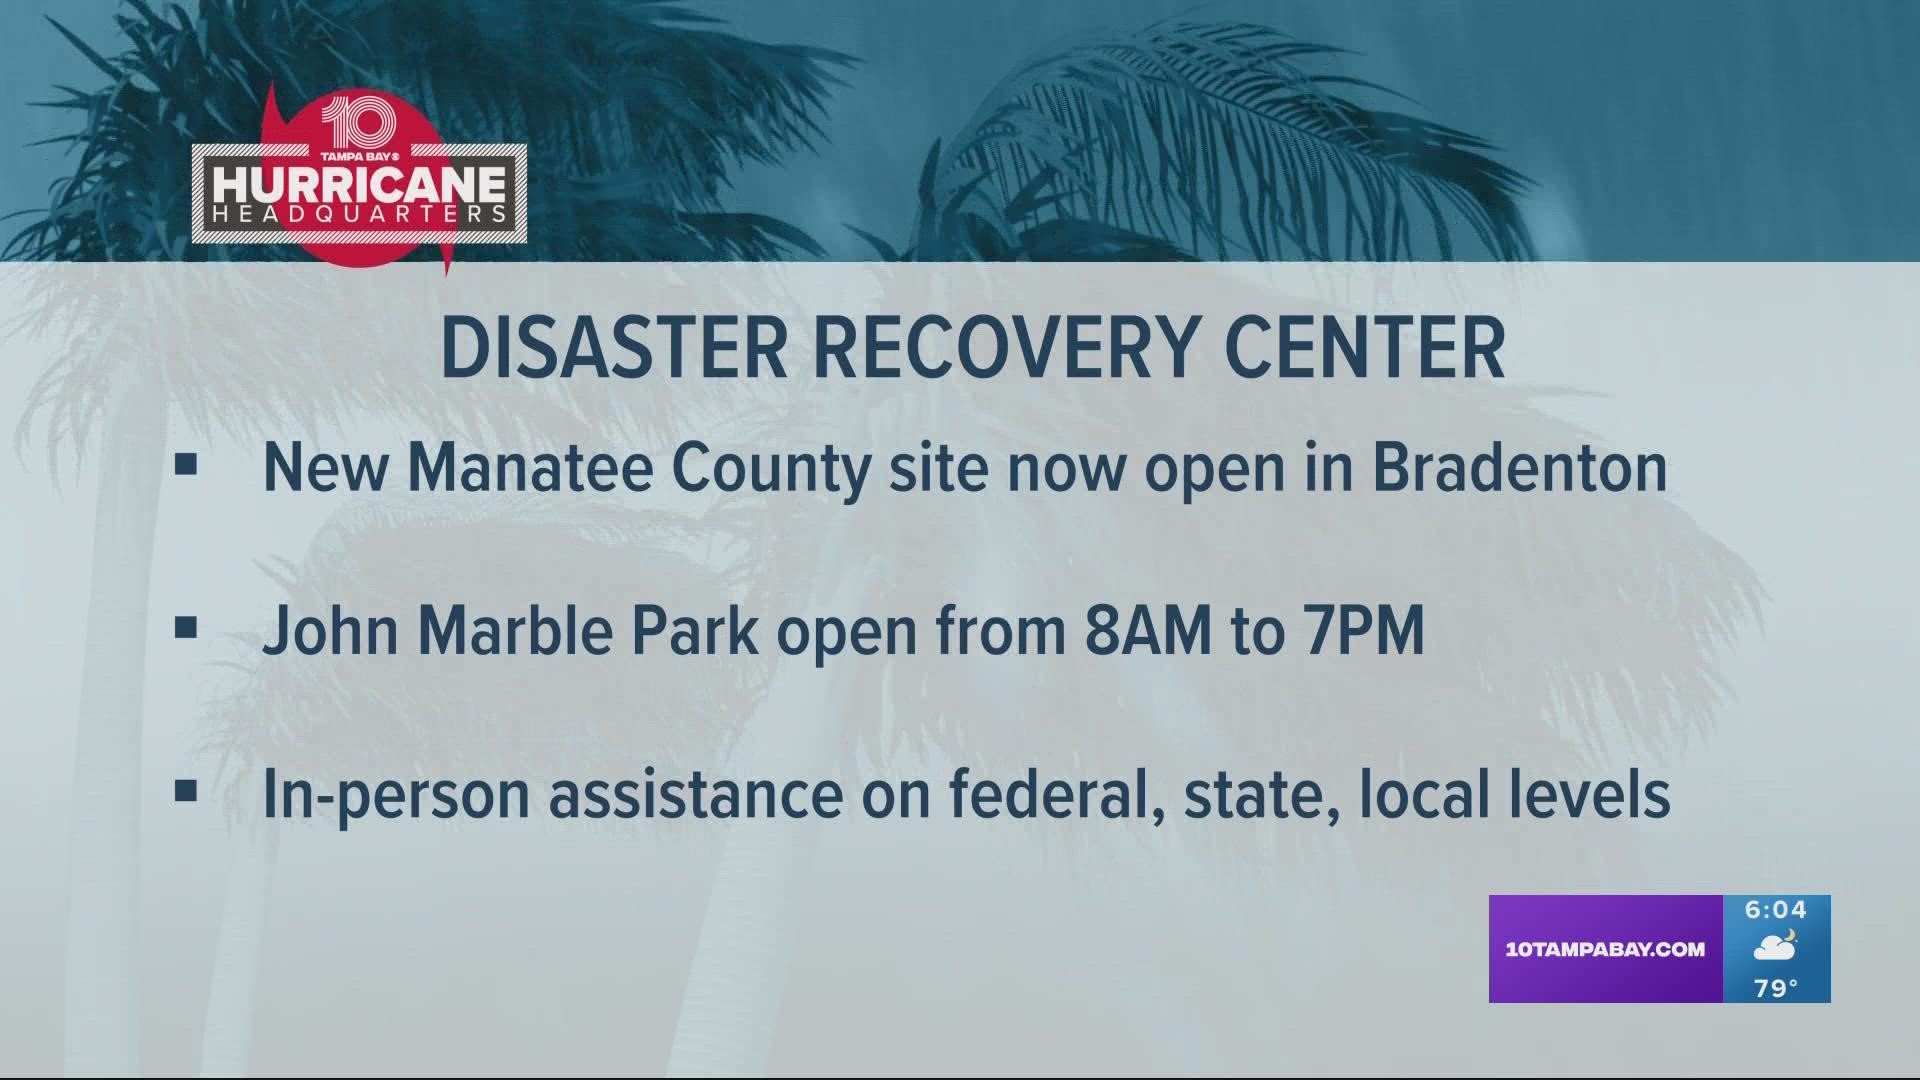 The centers provide impacted residents with information from Florida state agencies, FEMA and U.S. Small Business Administration.